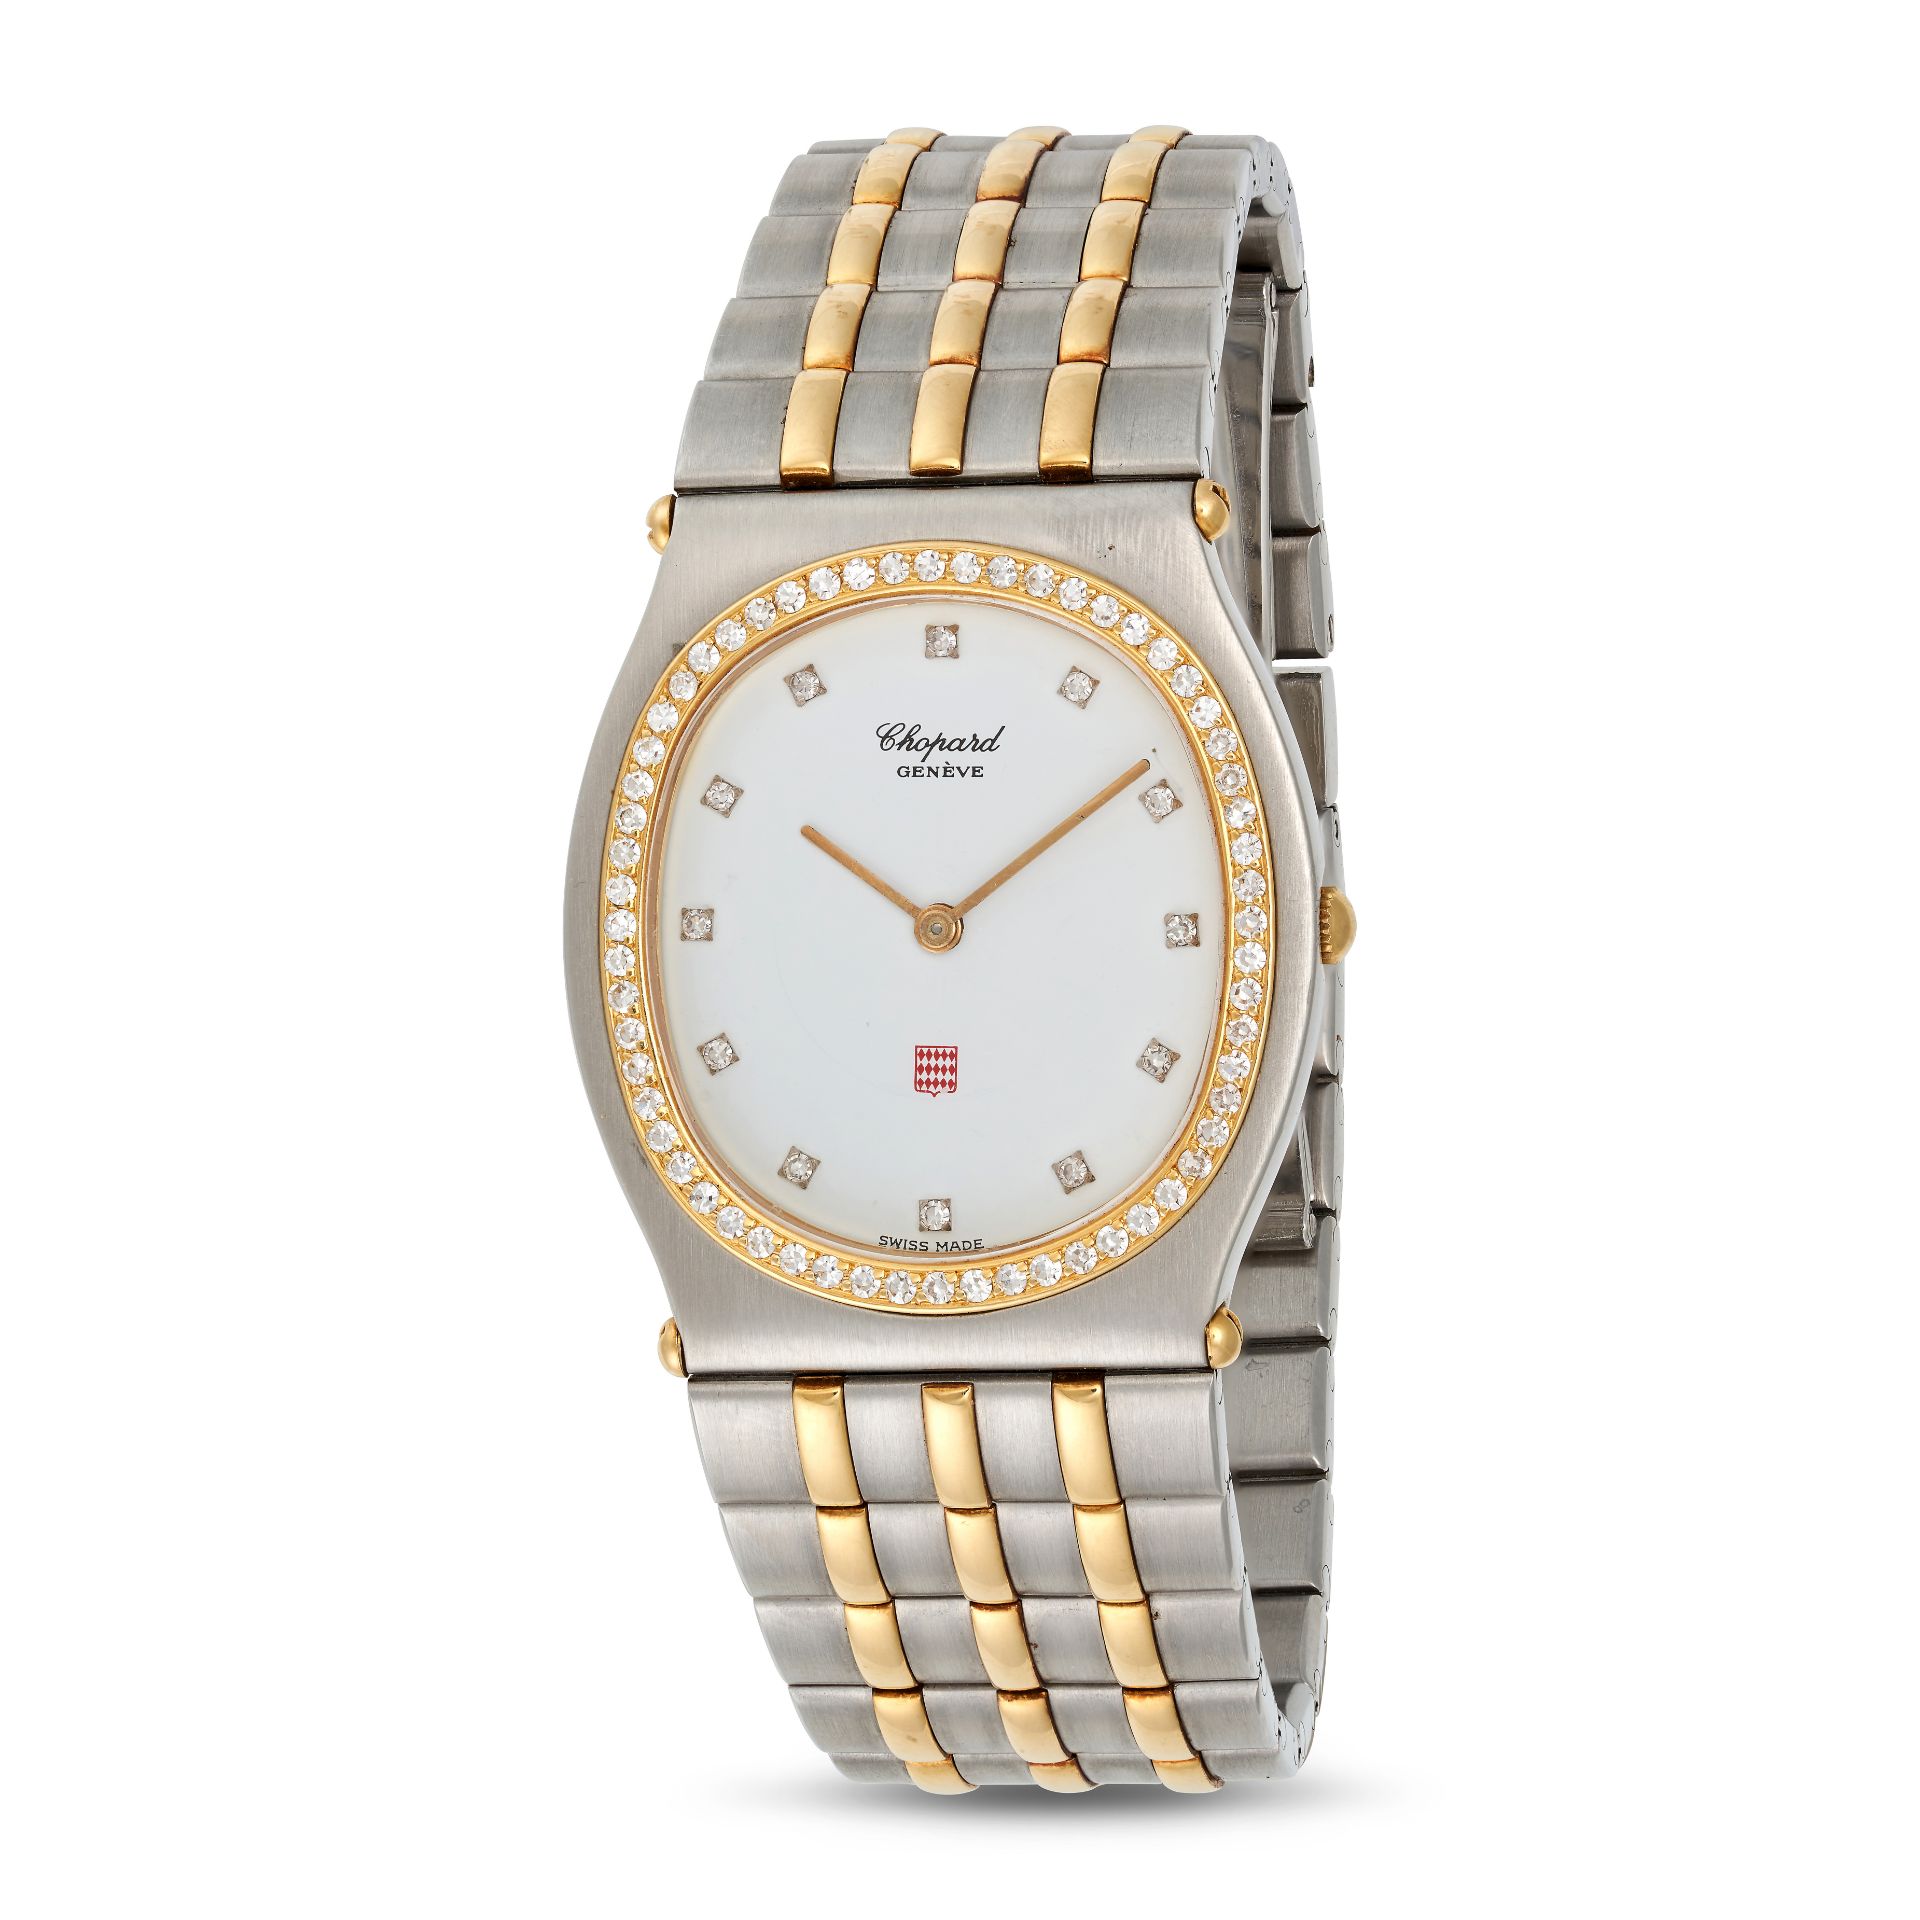 CHOPARD - A BIMETAL CHOPARD MONTE-CARLO WRISTWATCH in stainless steel and yellow gold, MC5492, th...